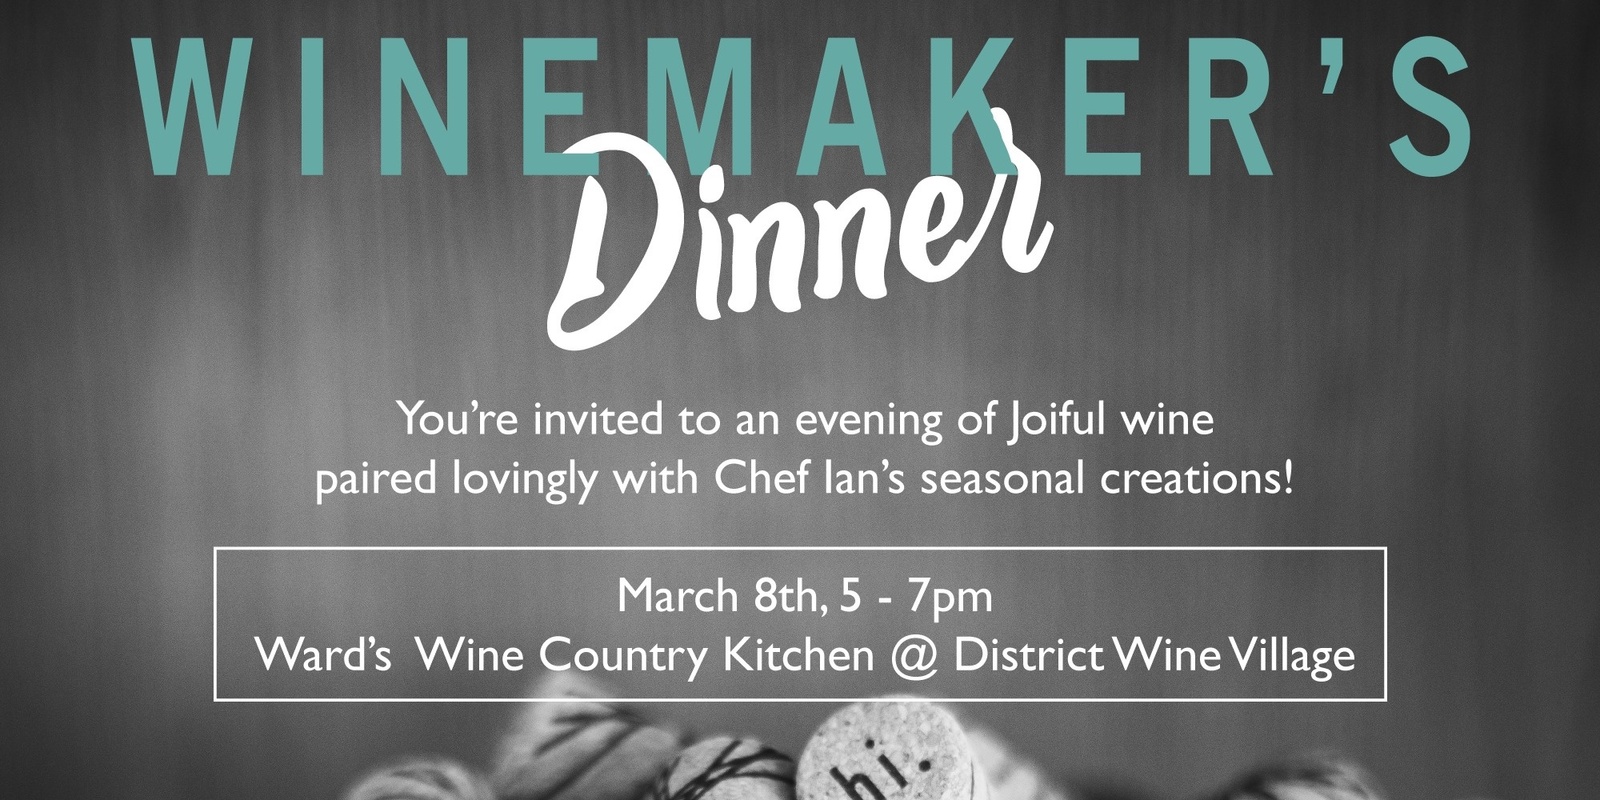 Banner image for Winemaker's Dinner with JoiRyde & Ward's Wine Country Kitchen